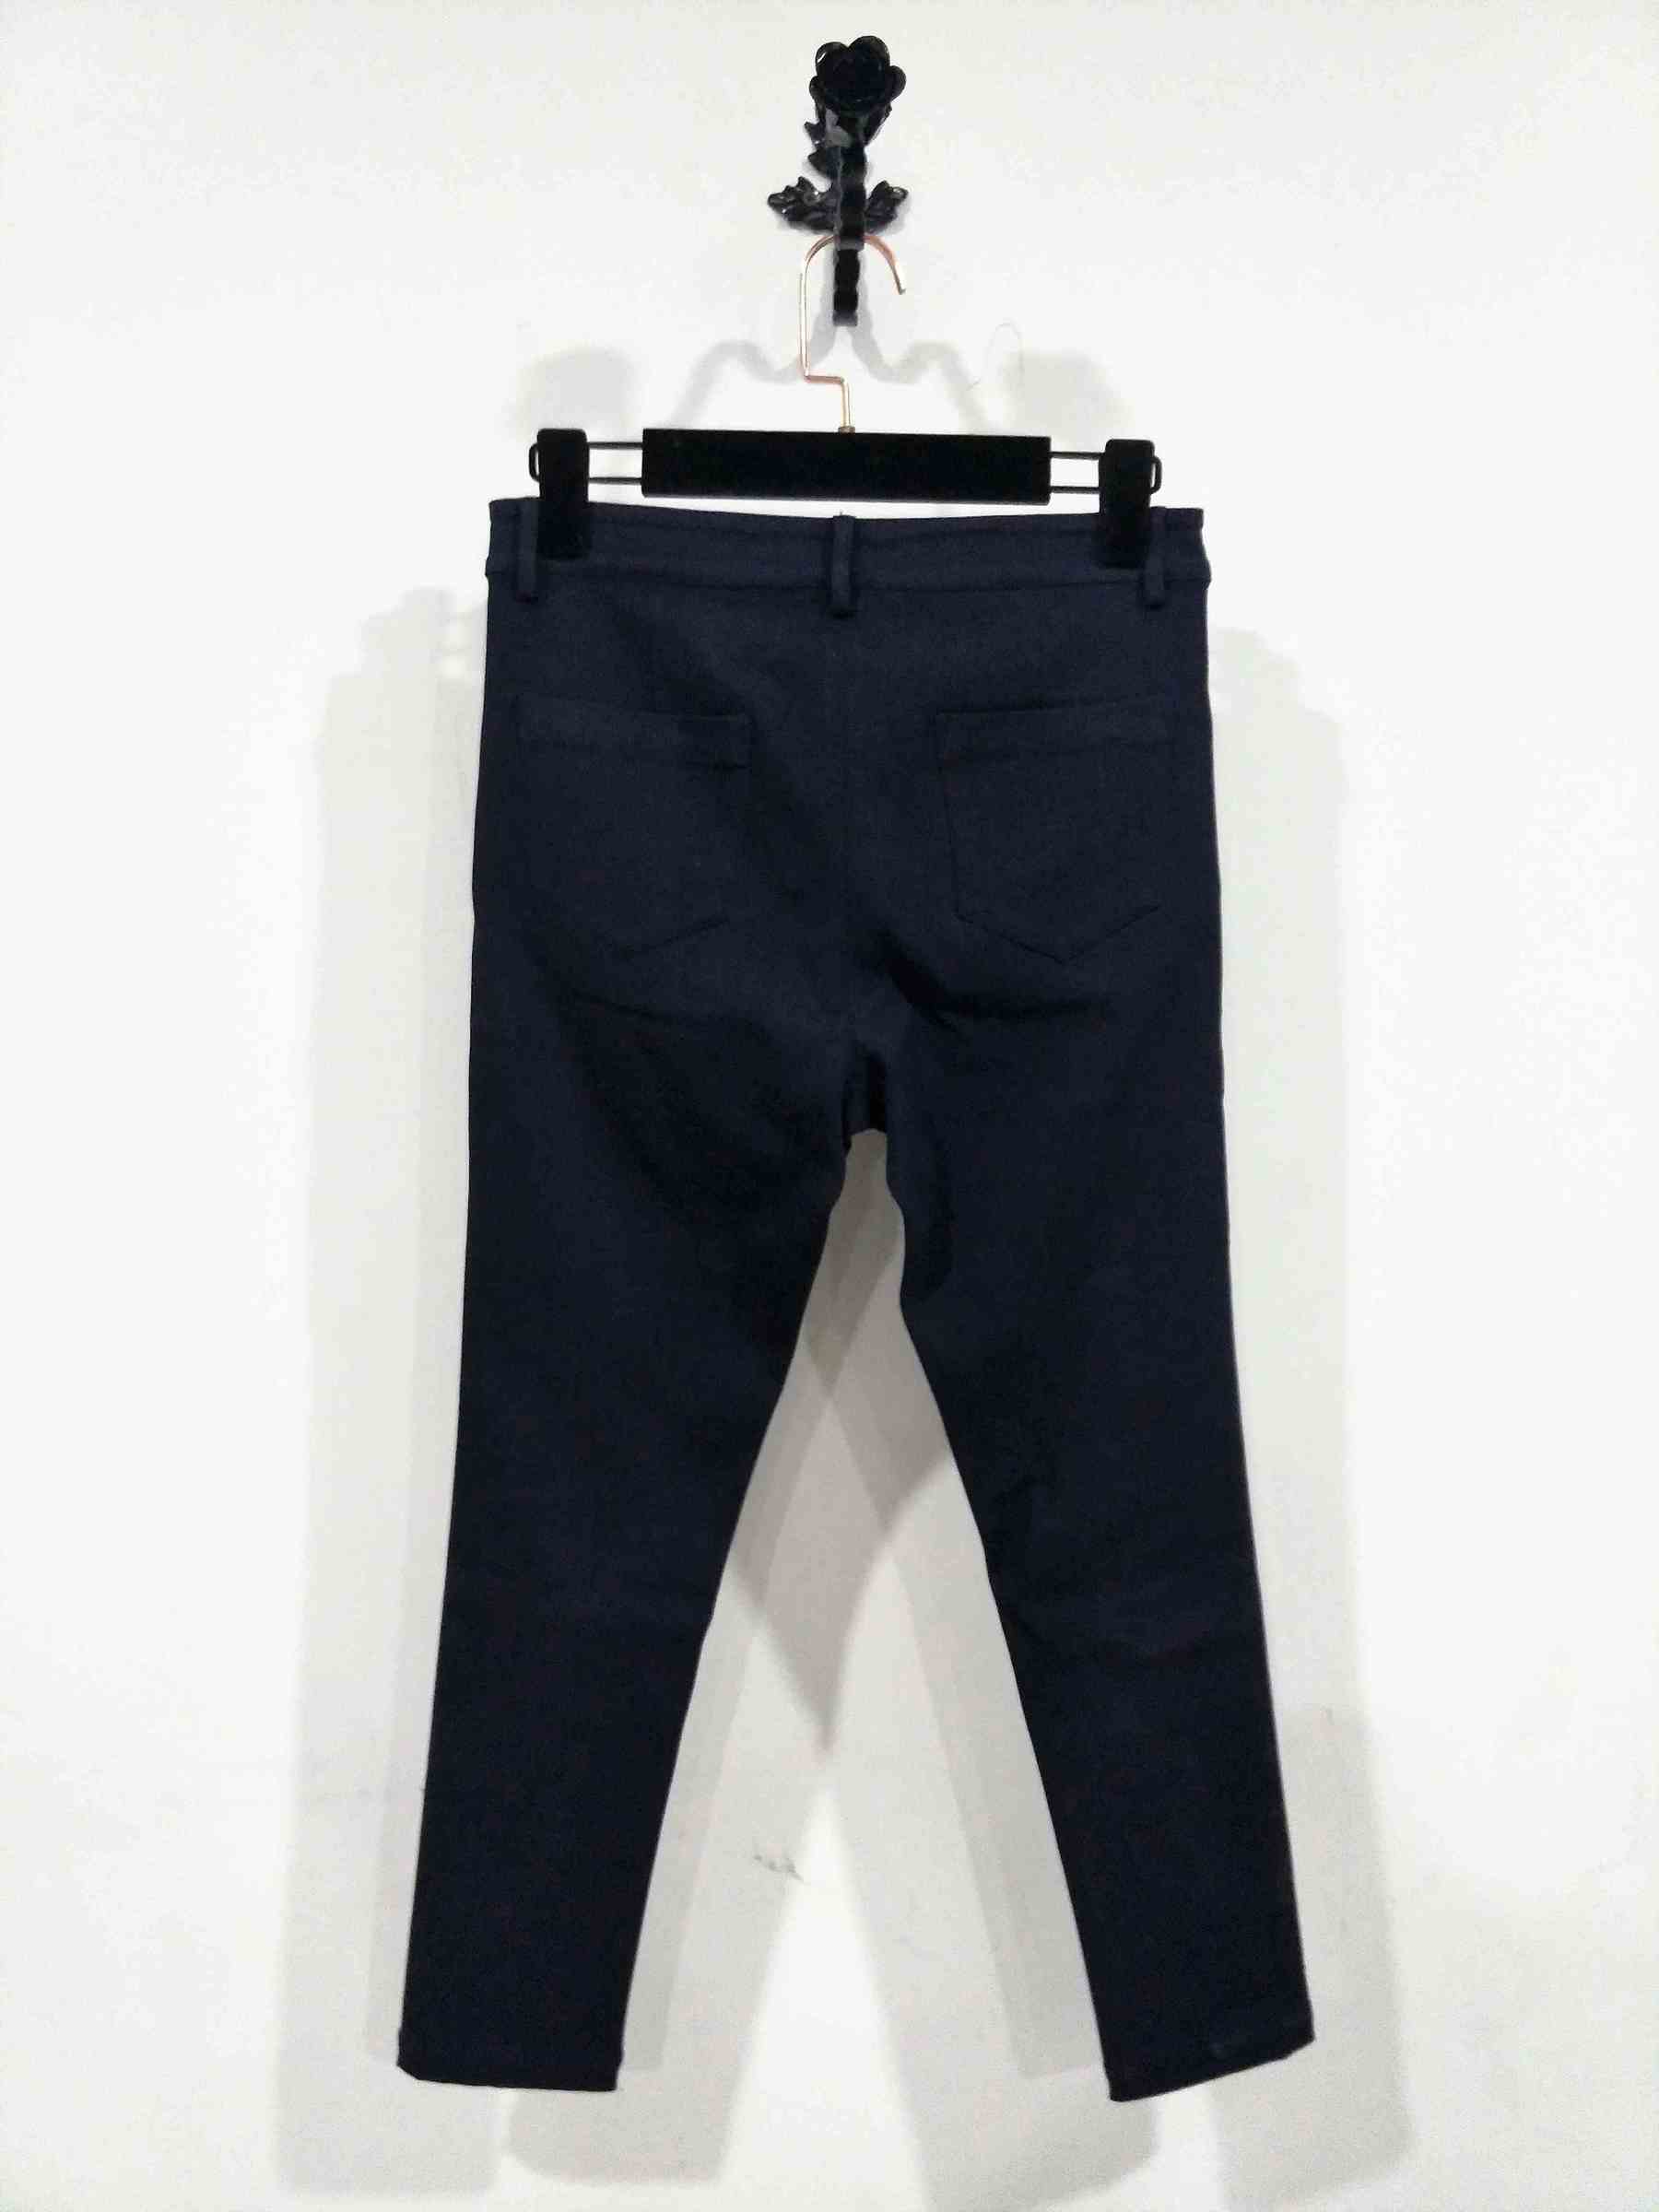 Pencil pants fashion design with navy jeans for high pants jeans without decoration ODM OEM service (6).jpg